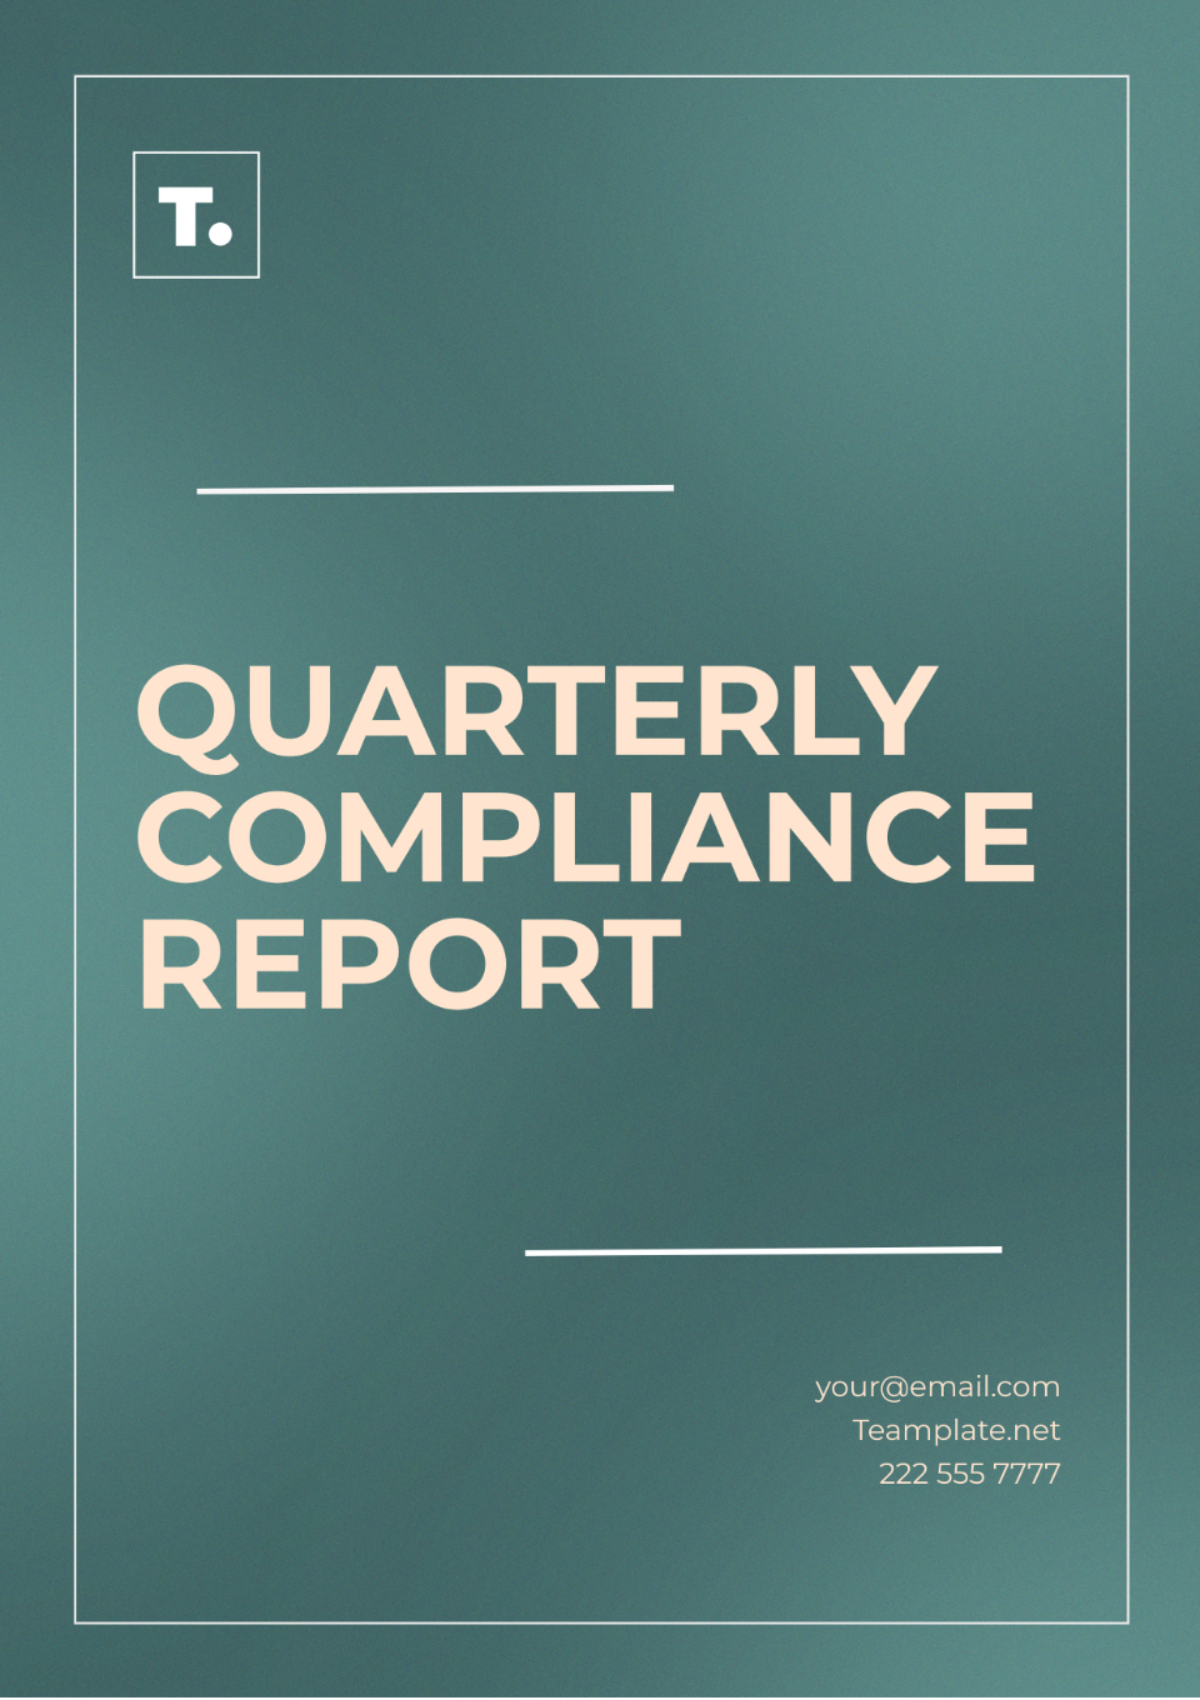 Quarterly Compliance Report Template